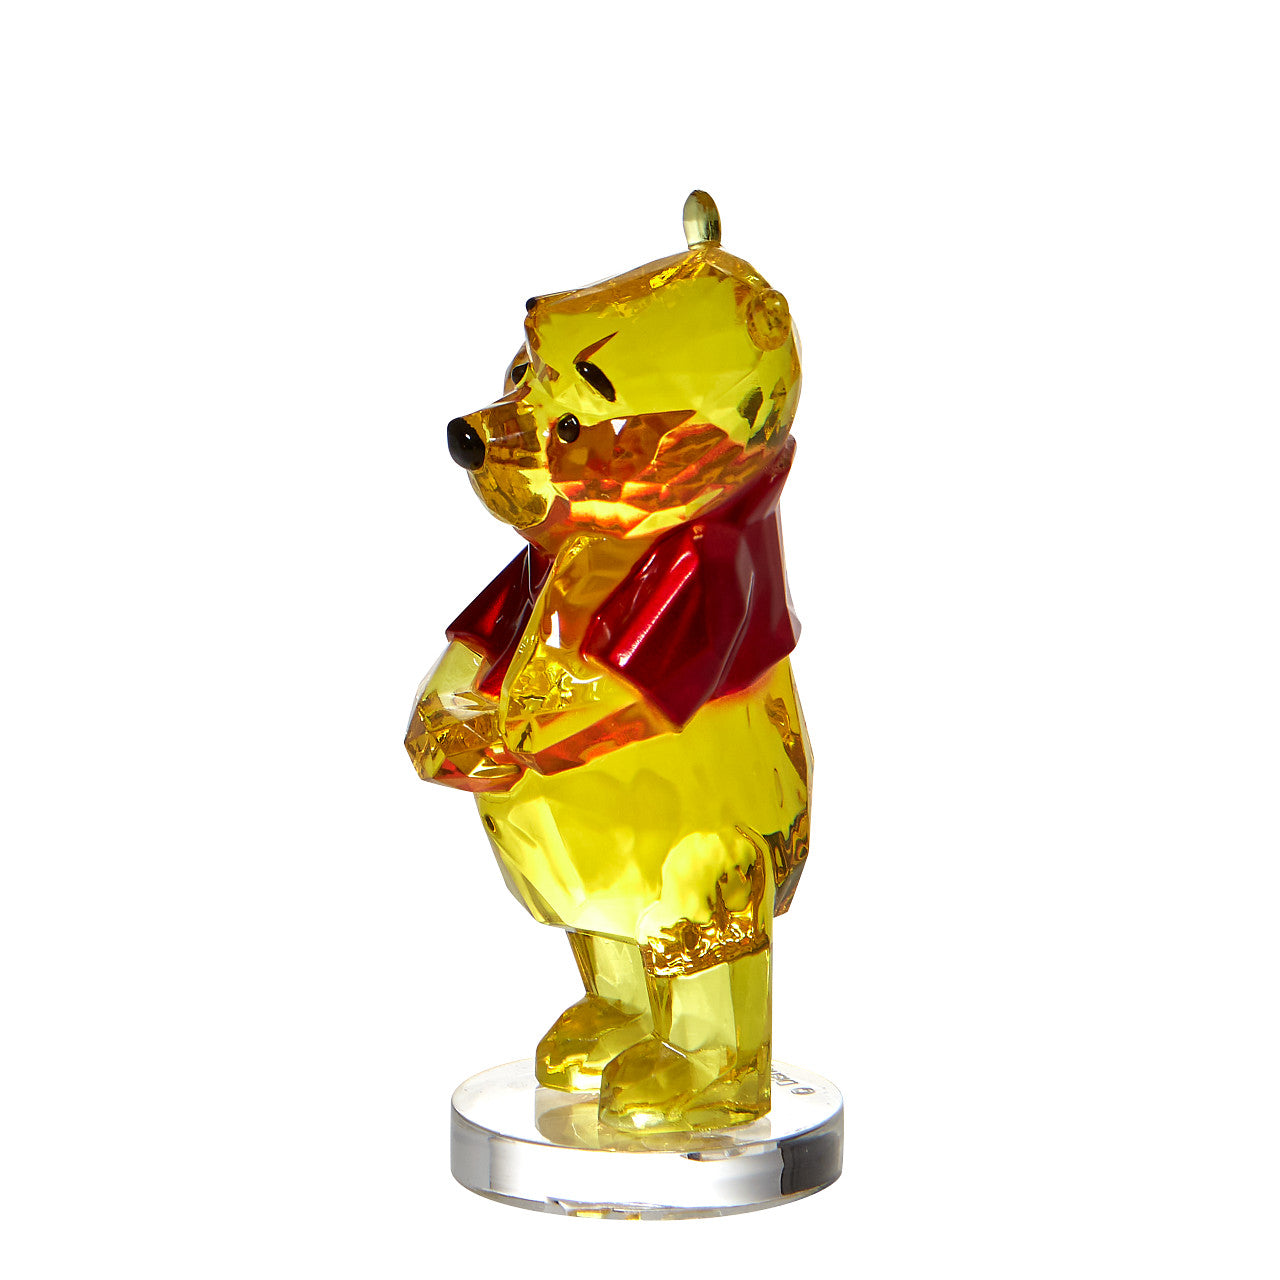 Winnie The Pooh Facets Figurine